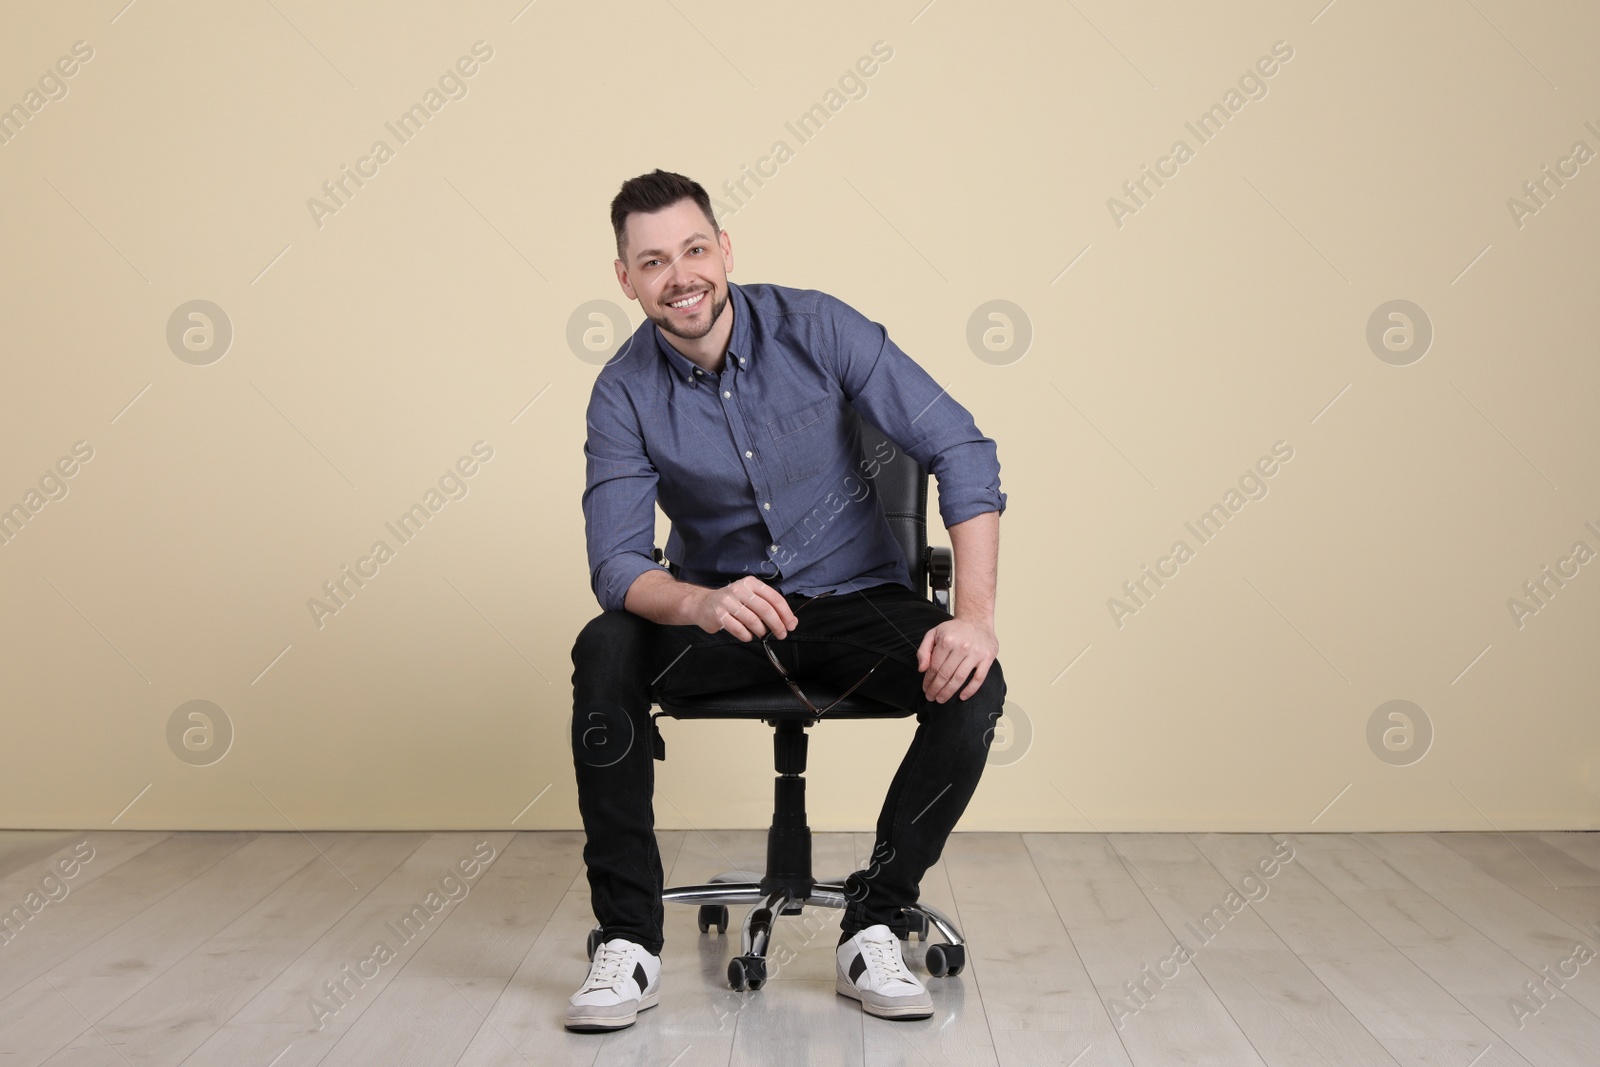 Photo of Handsome man with glasses sitting in office chair near beige wall indoors